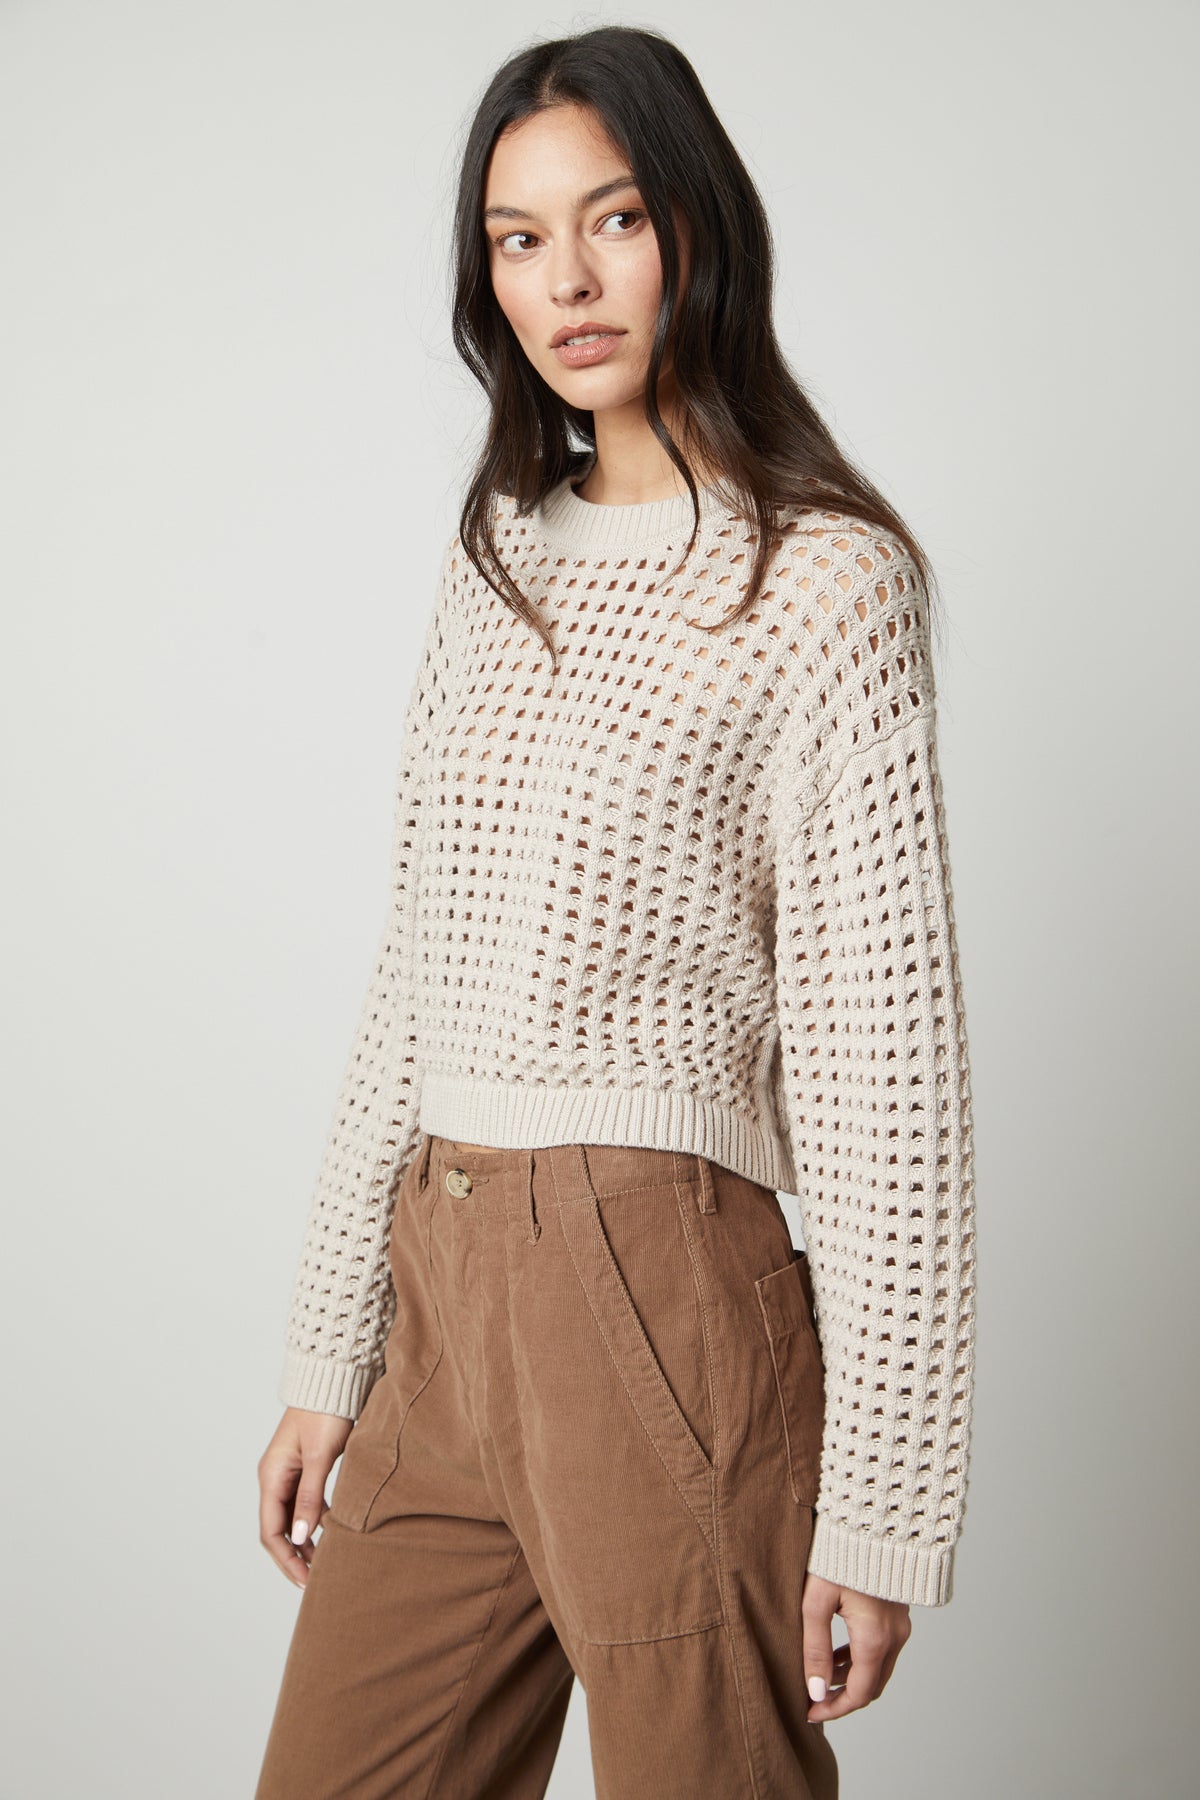 The model is wearing a SAMMIE MESH KNIT CREW NECK SWEATER by Velvet by Graham & Spencer and tan pants.-26897858724033